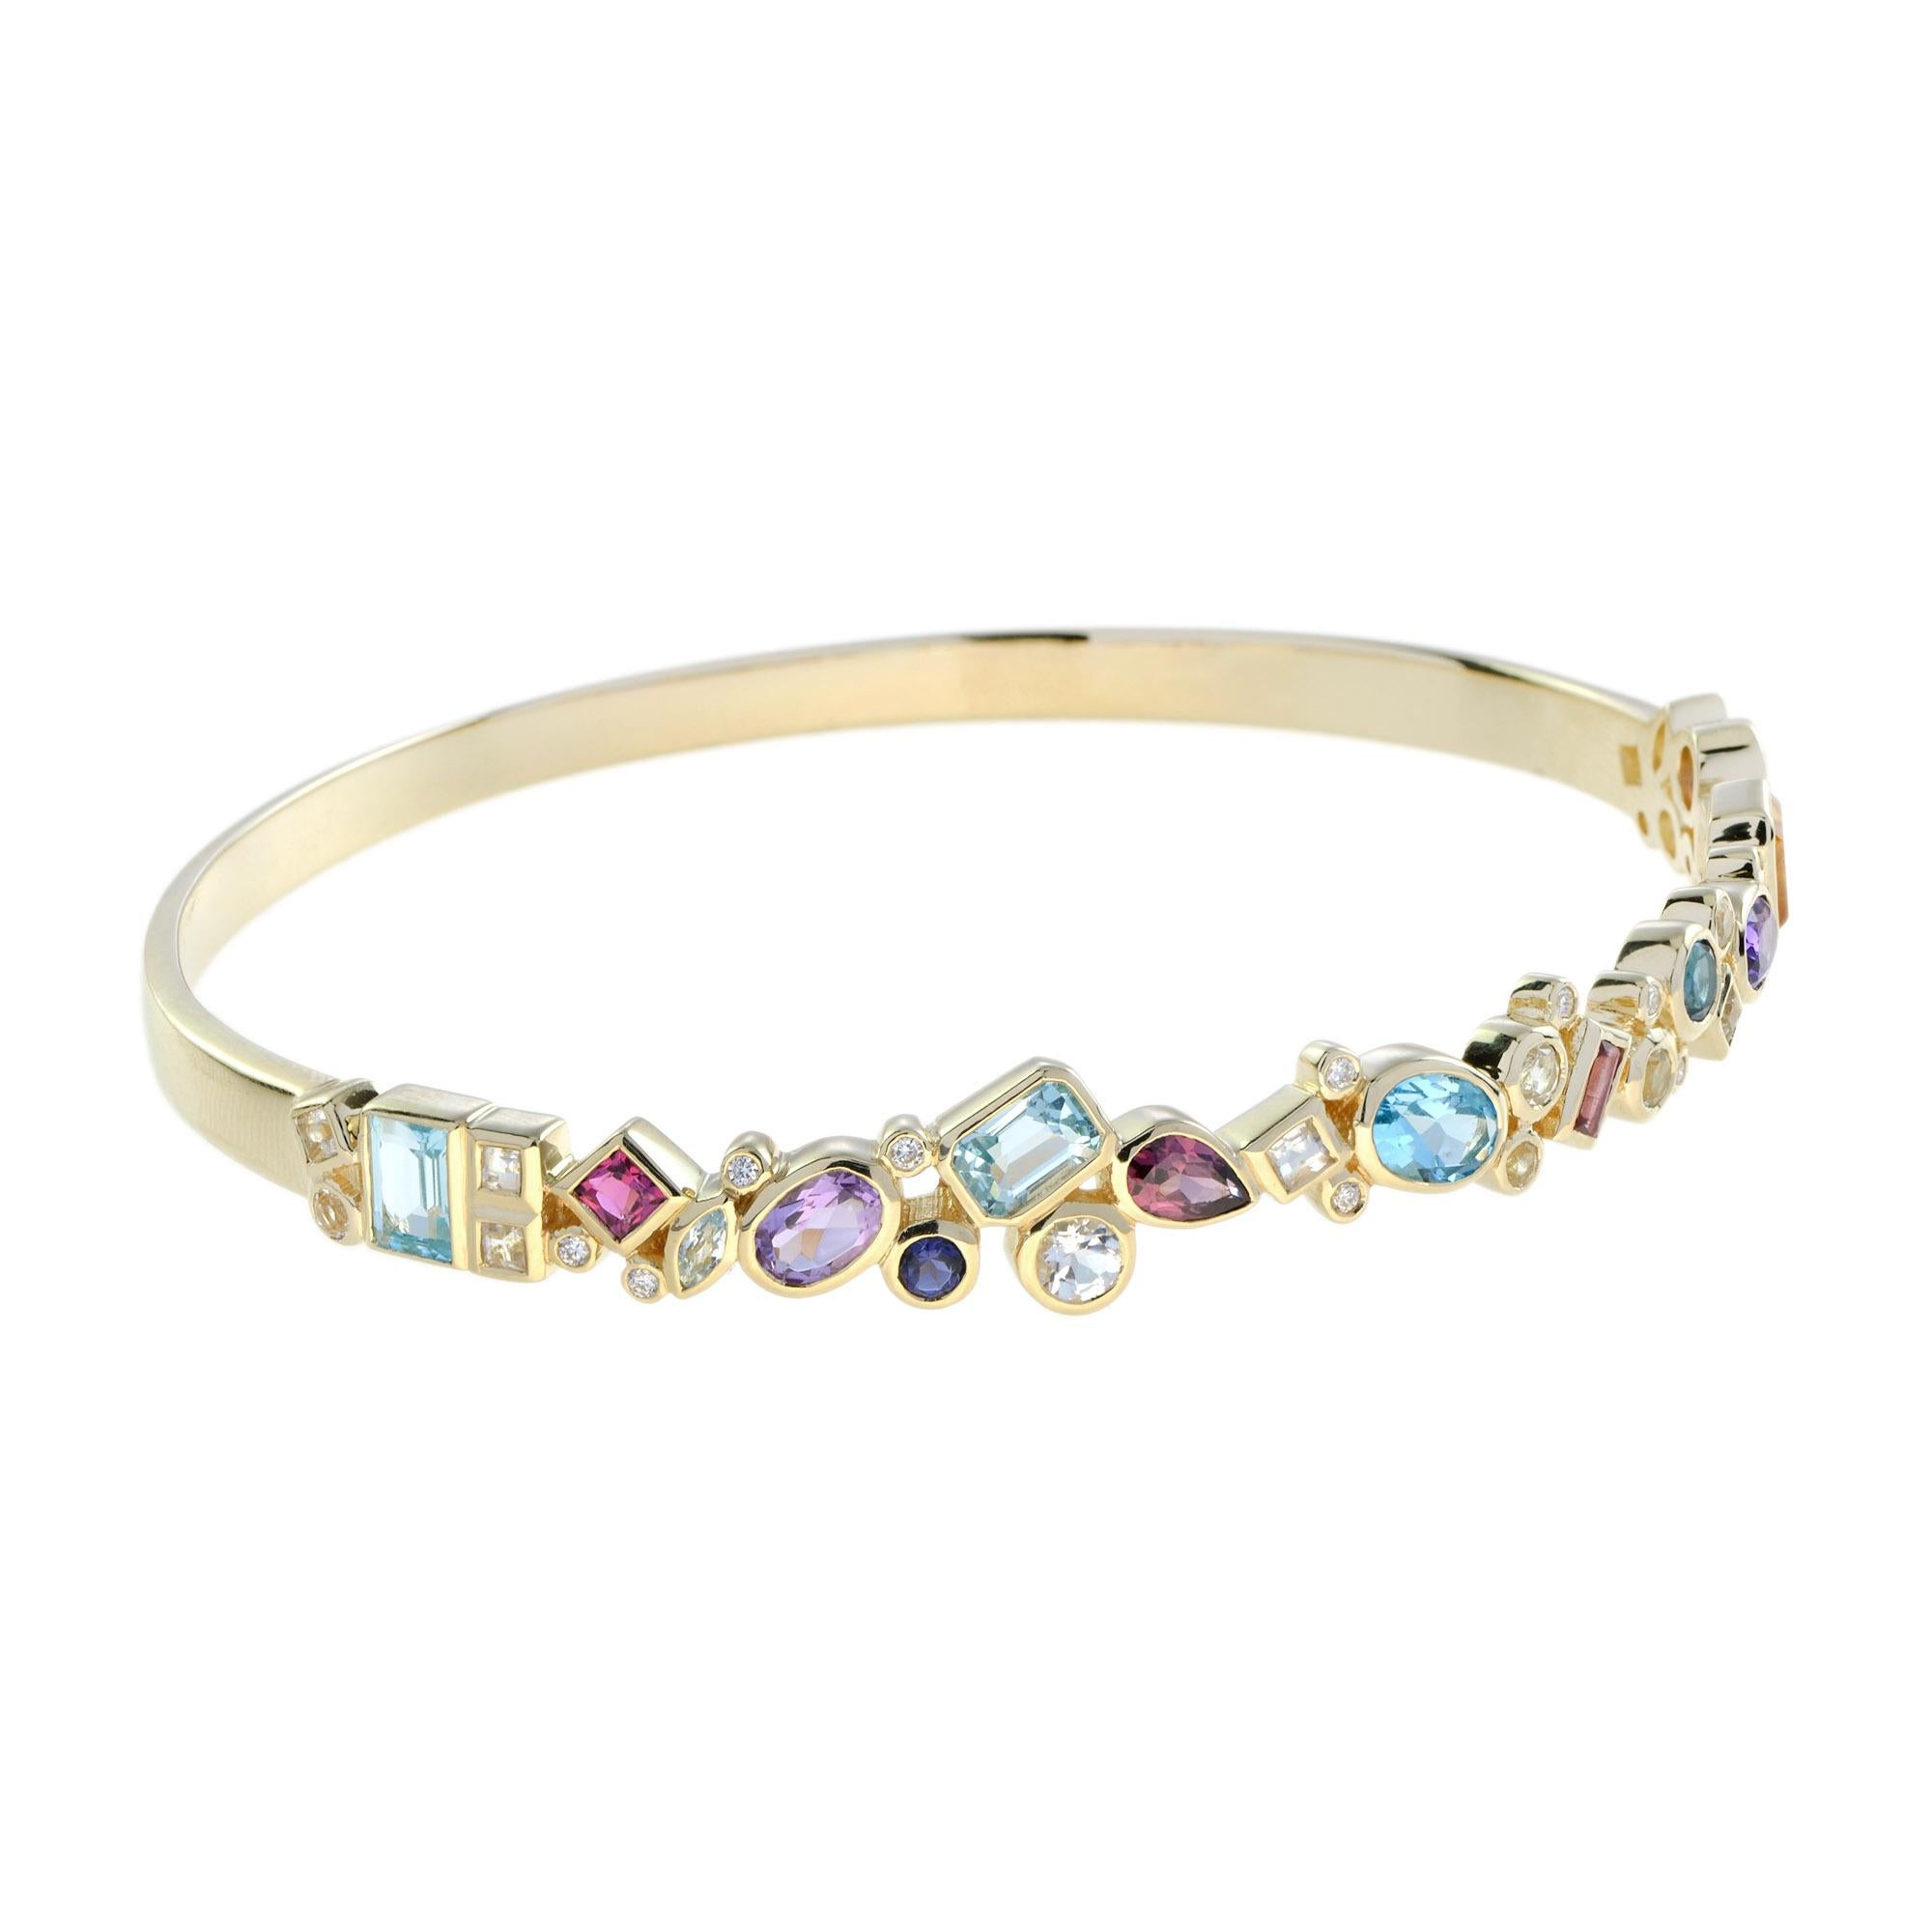 Celebrate color every day with this cheerful multi-gemstone cuff bracelet. Its irresistible design features various-shaped stones of various sizes, including pink and white topaz, London, Swiss, sky blue topaz, amethyst, citrine, iolite, and